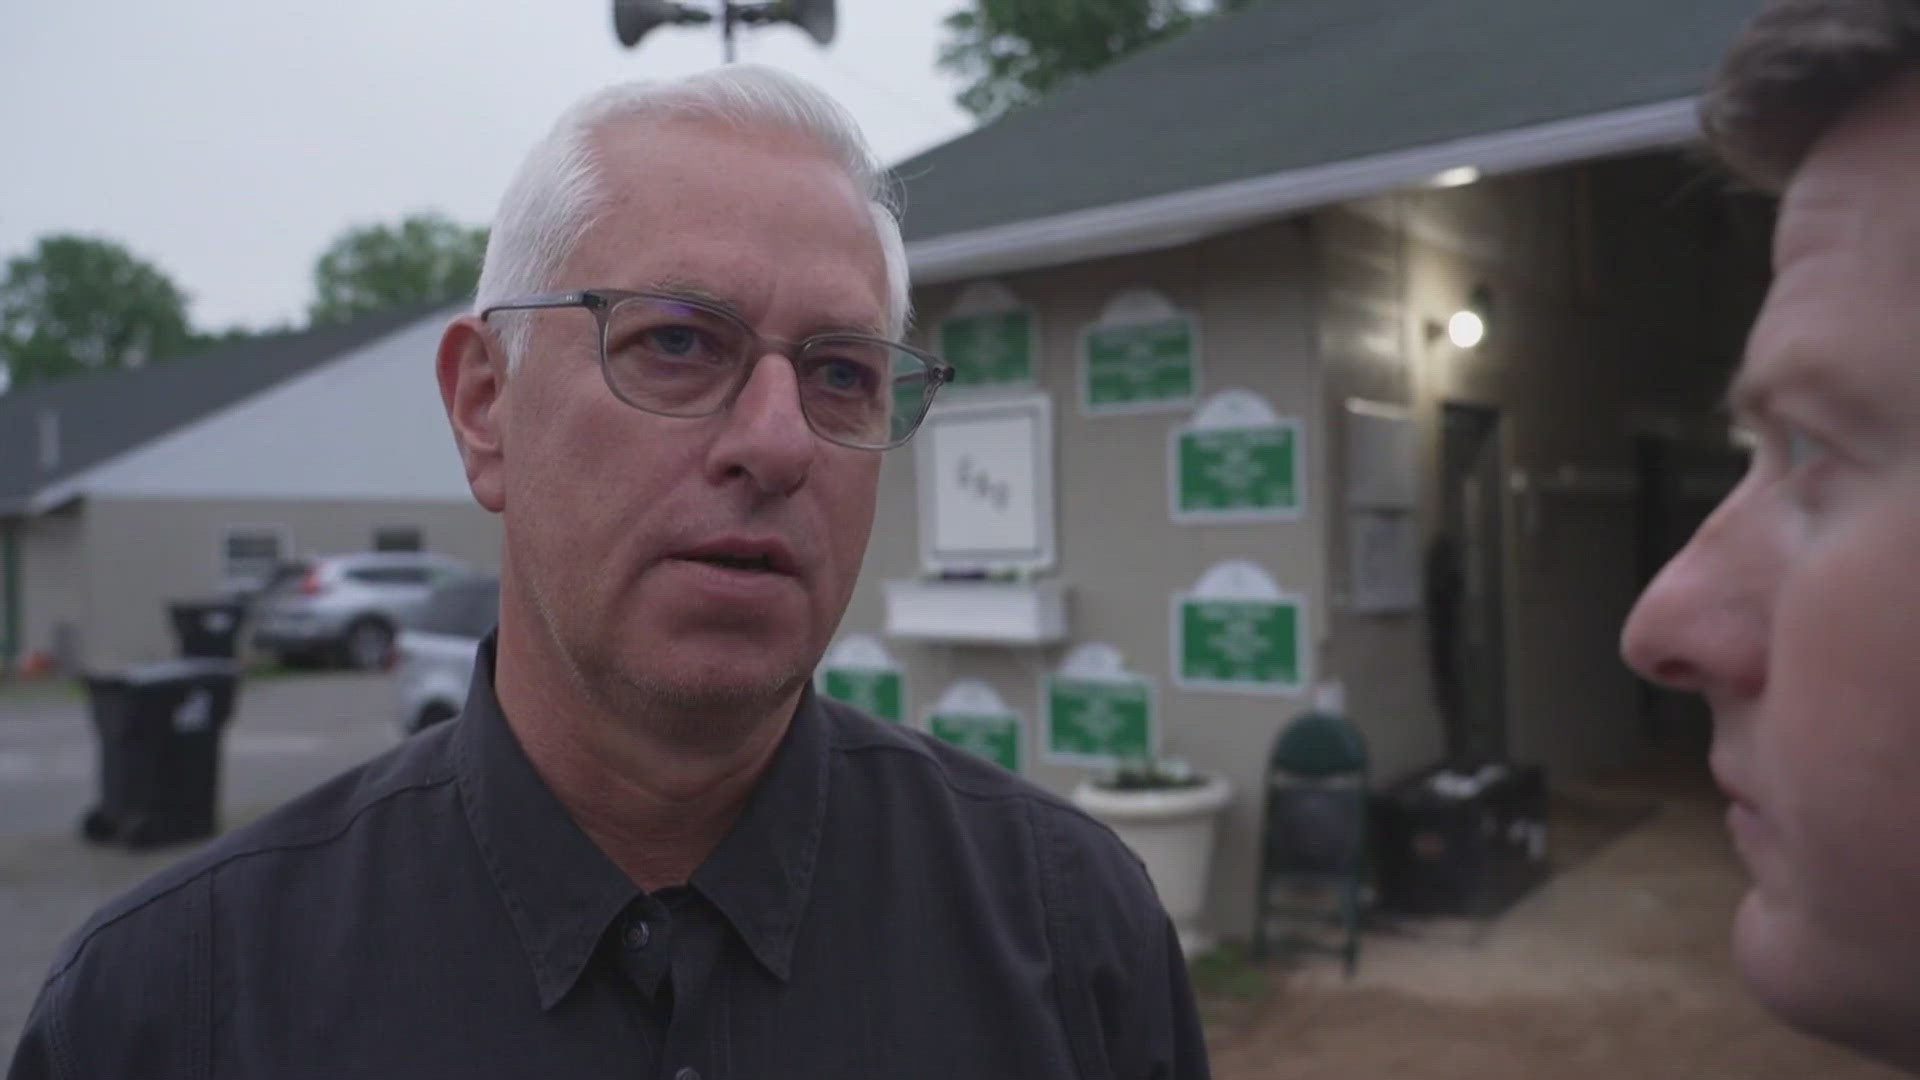 It's the morning of the Kentucky Derby, and trainer Todd Pletcher tells WHAS11 his expectations of the morning line favorite Fierceness in the Kentucky Derby.